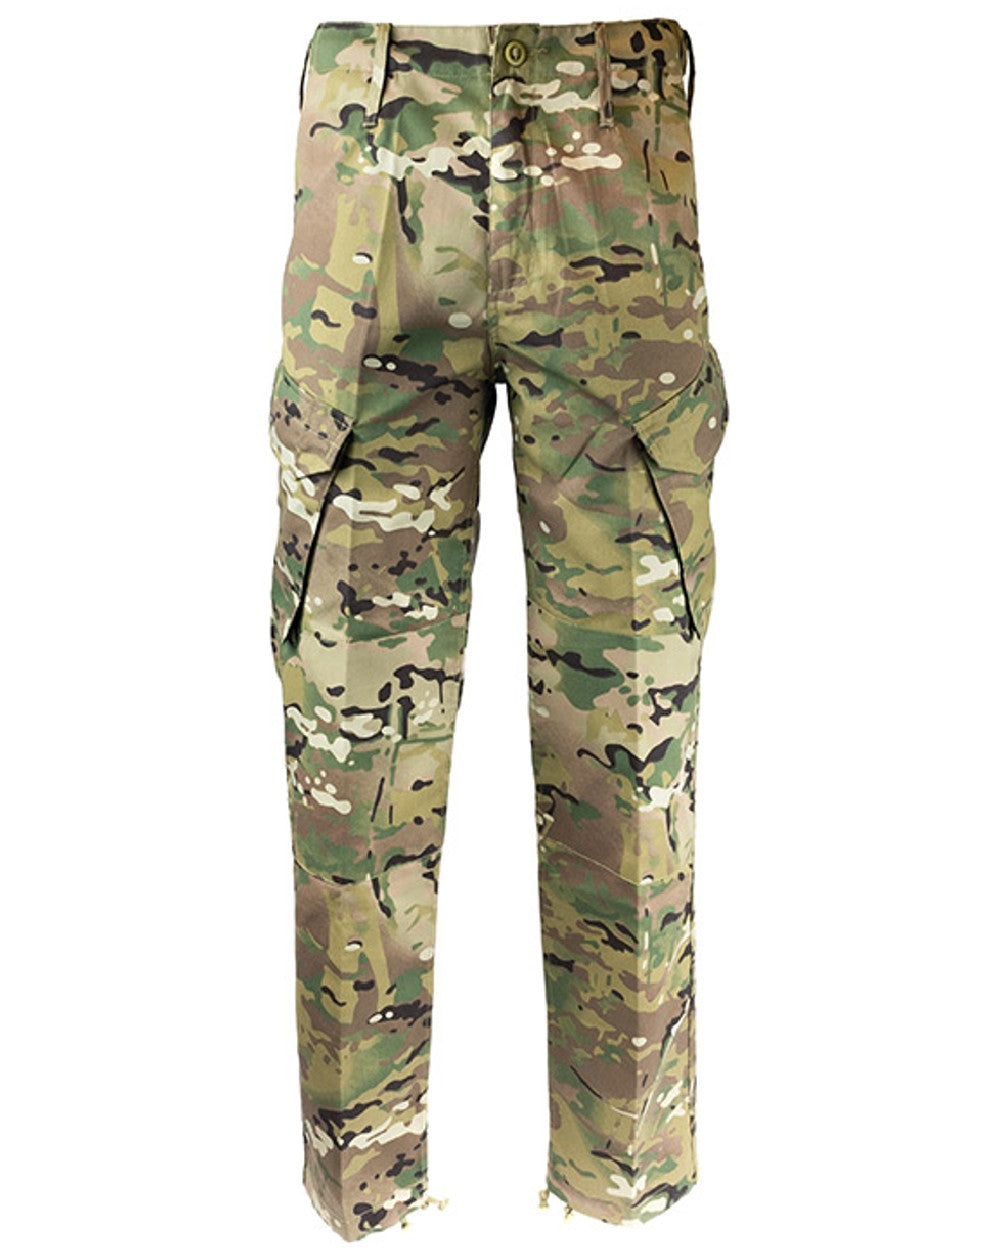 VCAM coloured Viper PCS Trousers on White background 